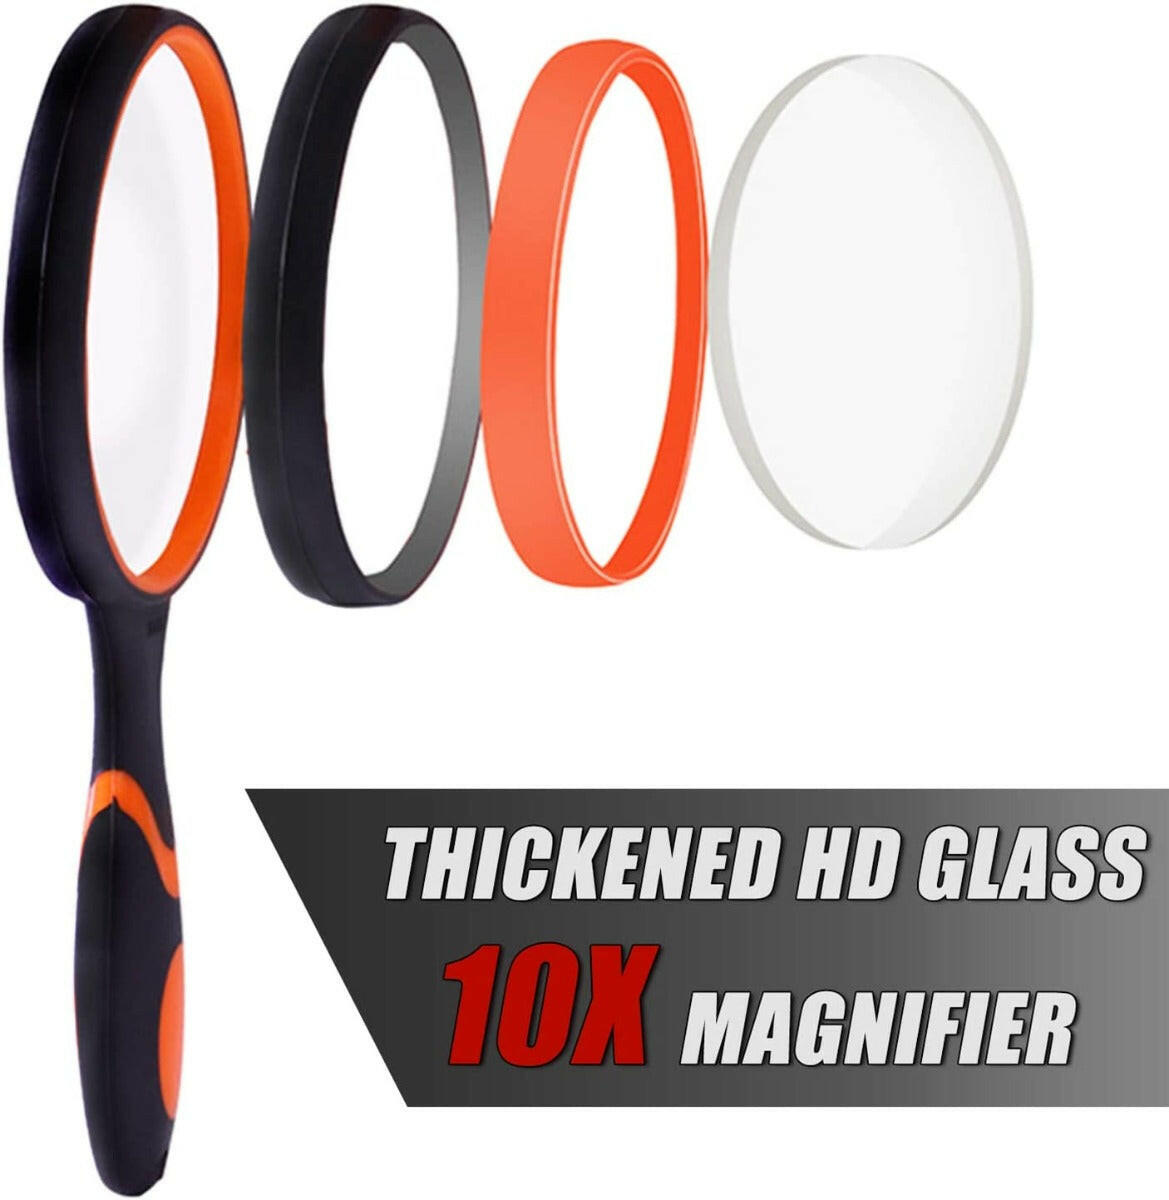 Multipurpose 10X HD thickened magnifying glass with 75MM Lens Magnifier and Non-Slip Soft Handle (Orange) - EXHOBBY